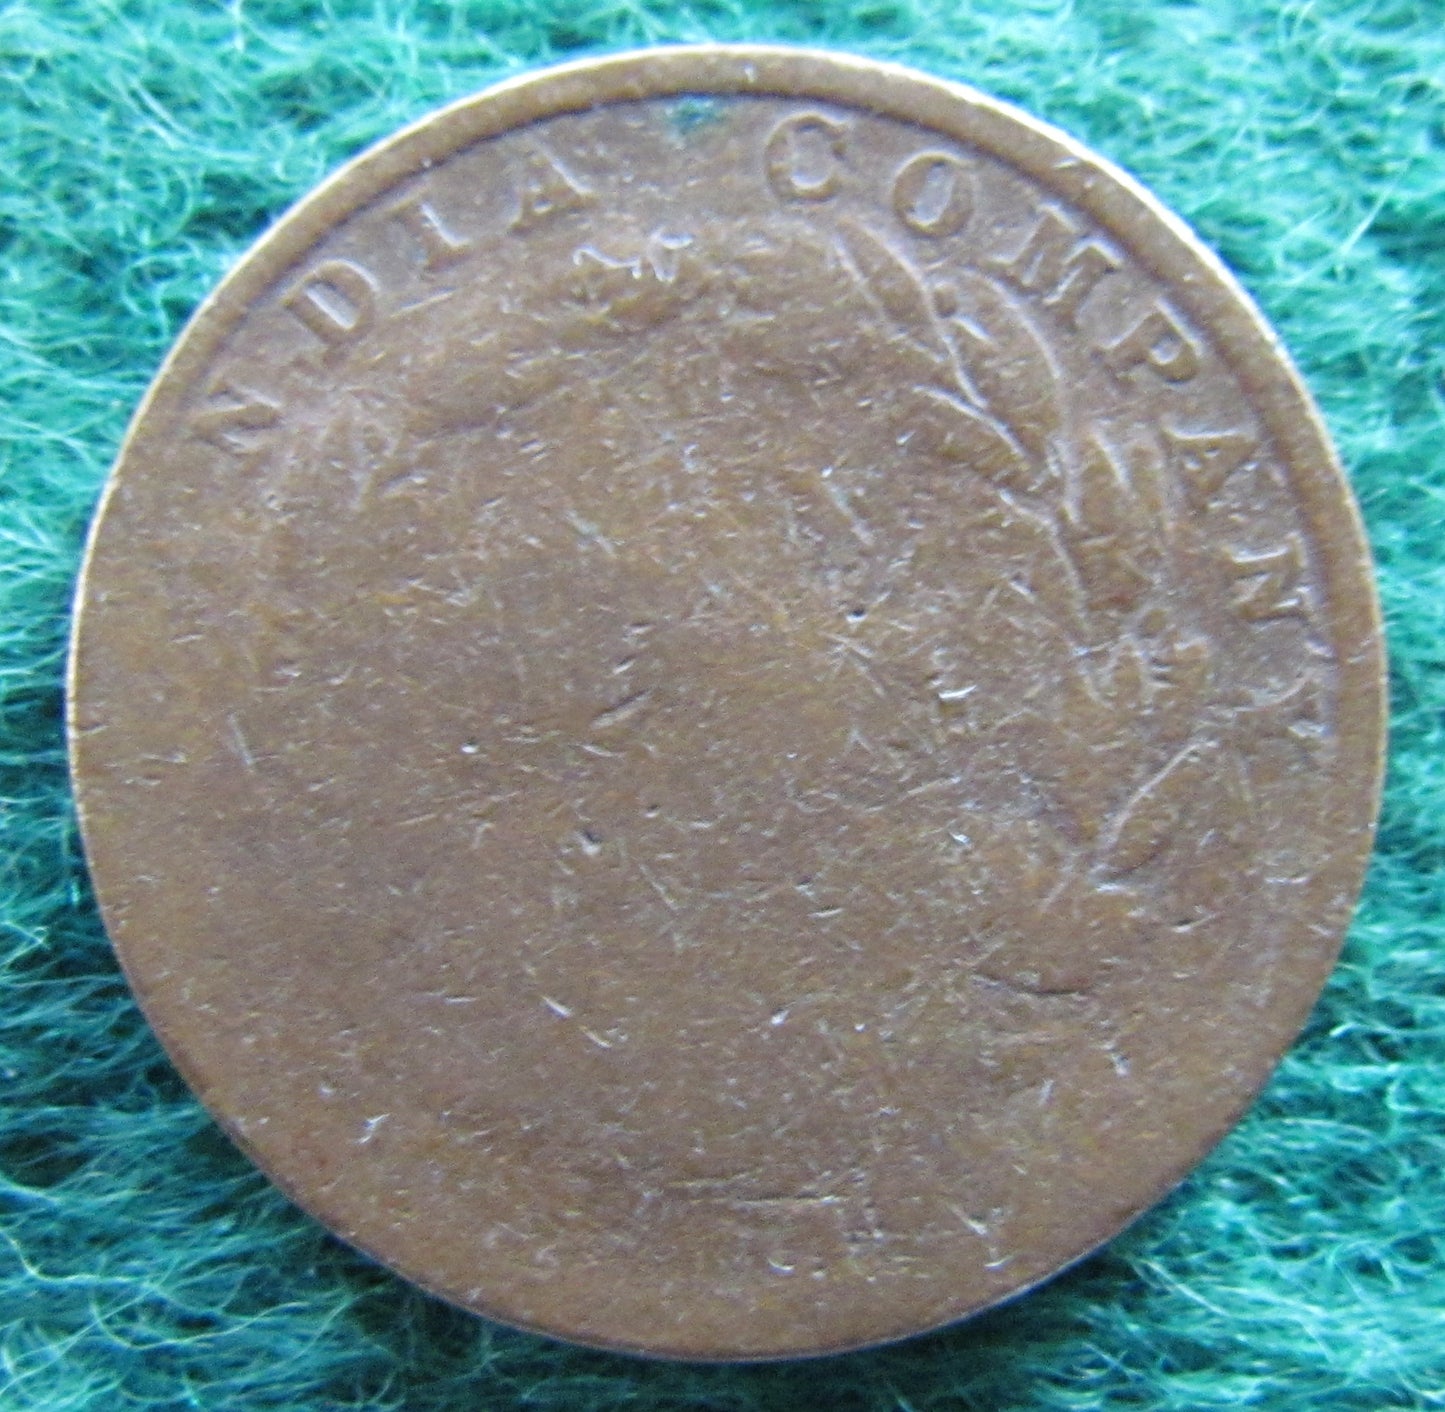 East India Company 1845 1/2 Cent Queen Victoria Coin - Circulated